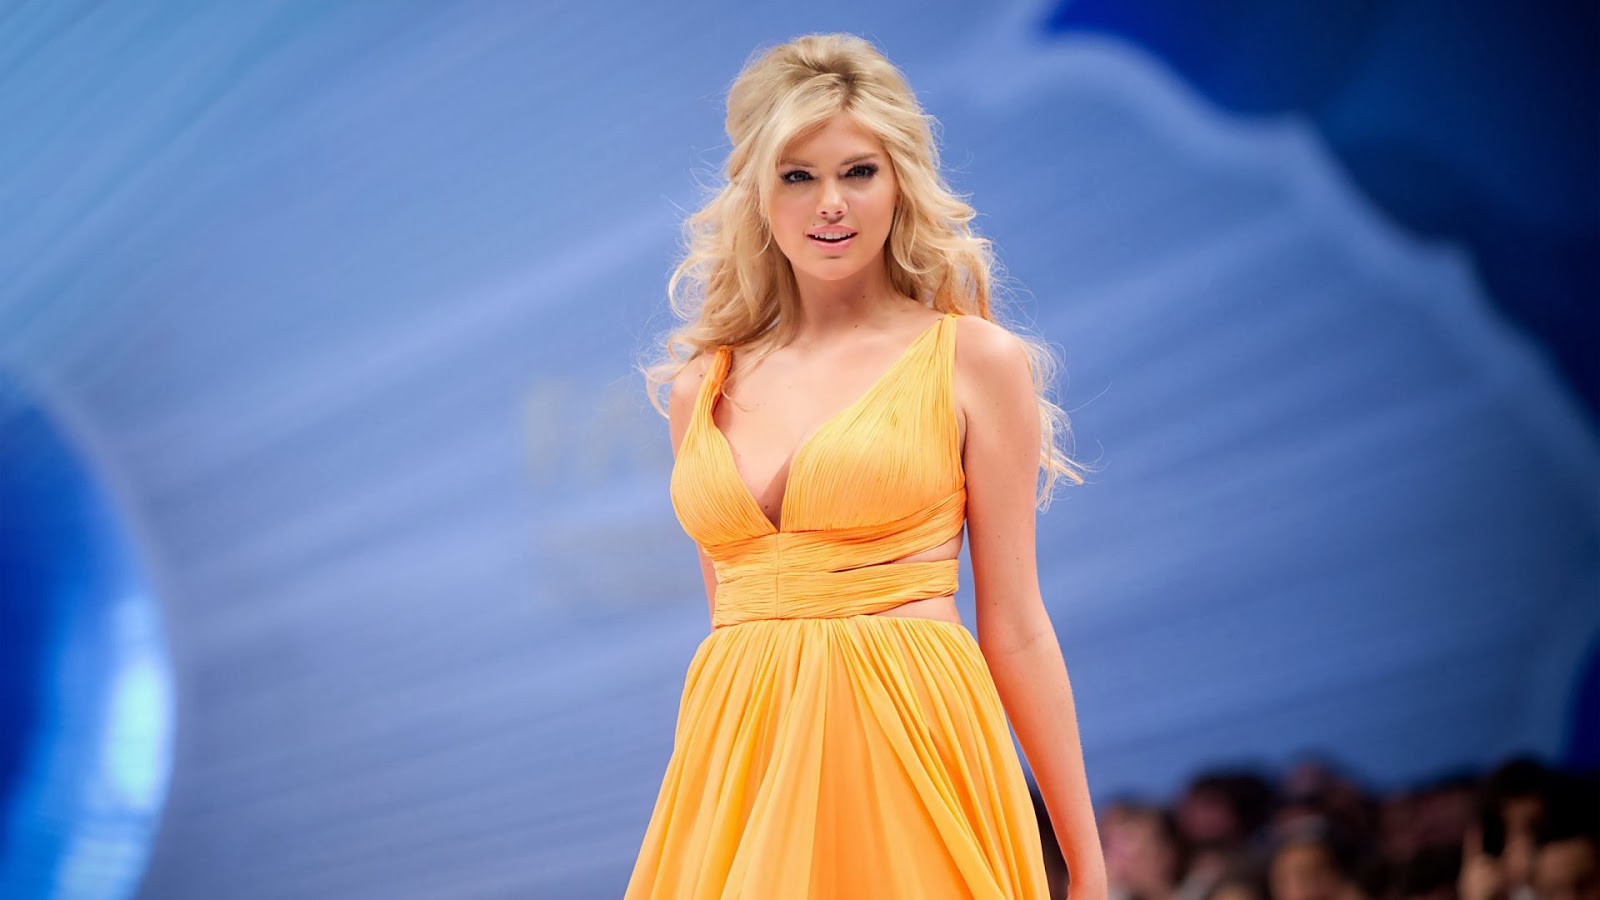 Kate Upton 1 1 Arena Pile Top 10 Hottest Curvy Actresses in Hollywood